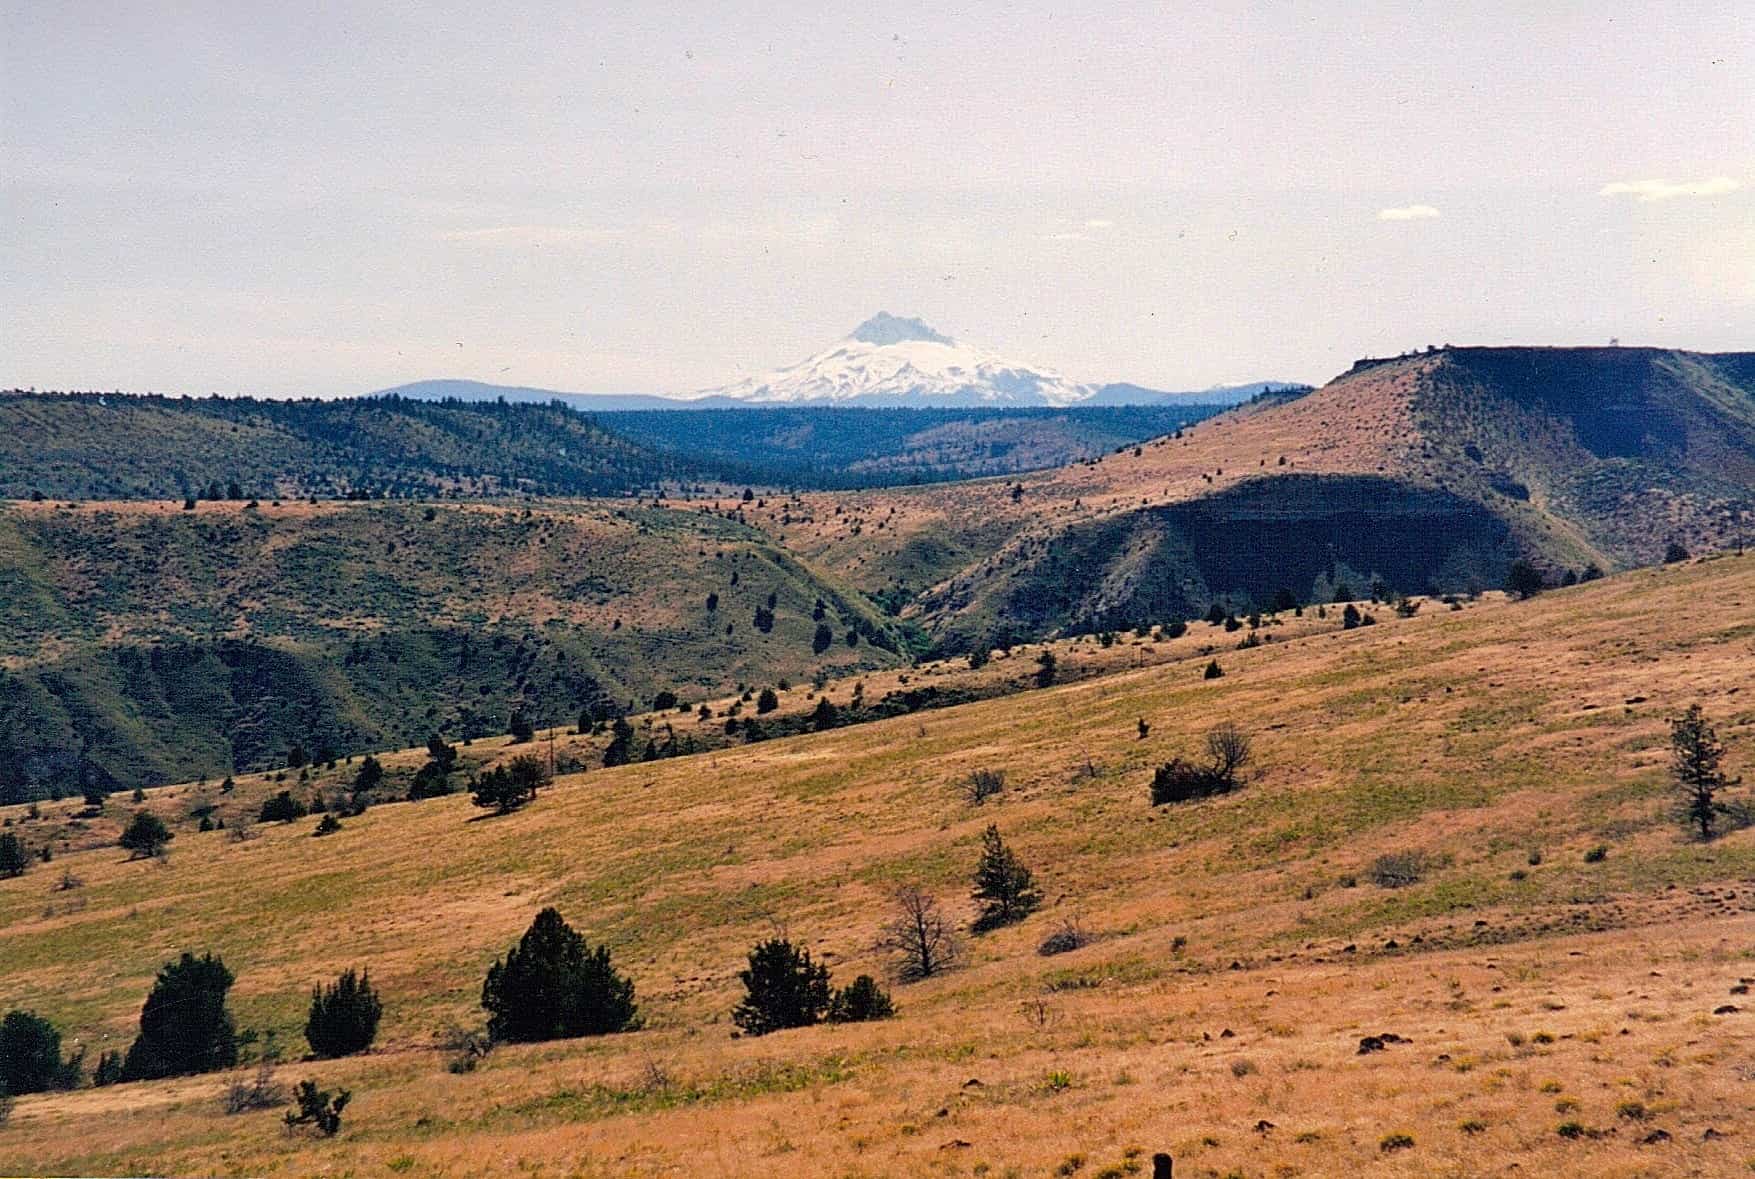 Native american cultural tour - View of Mount Hood